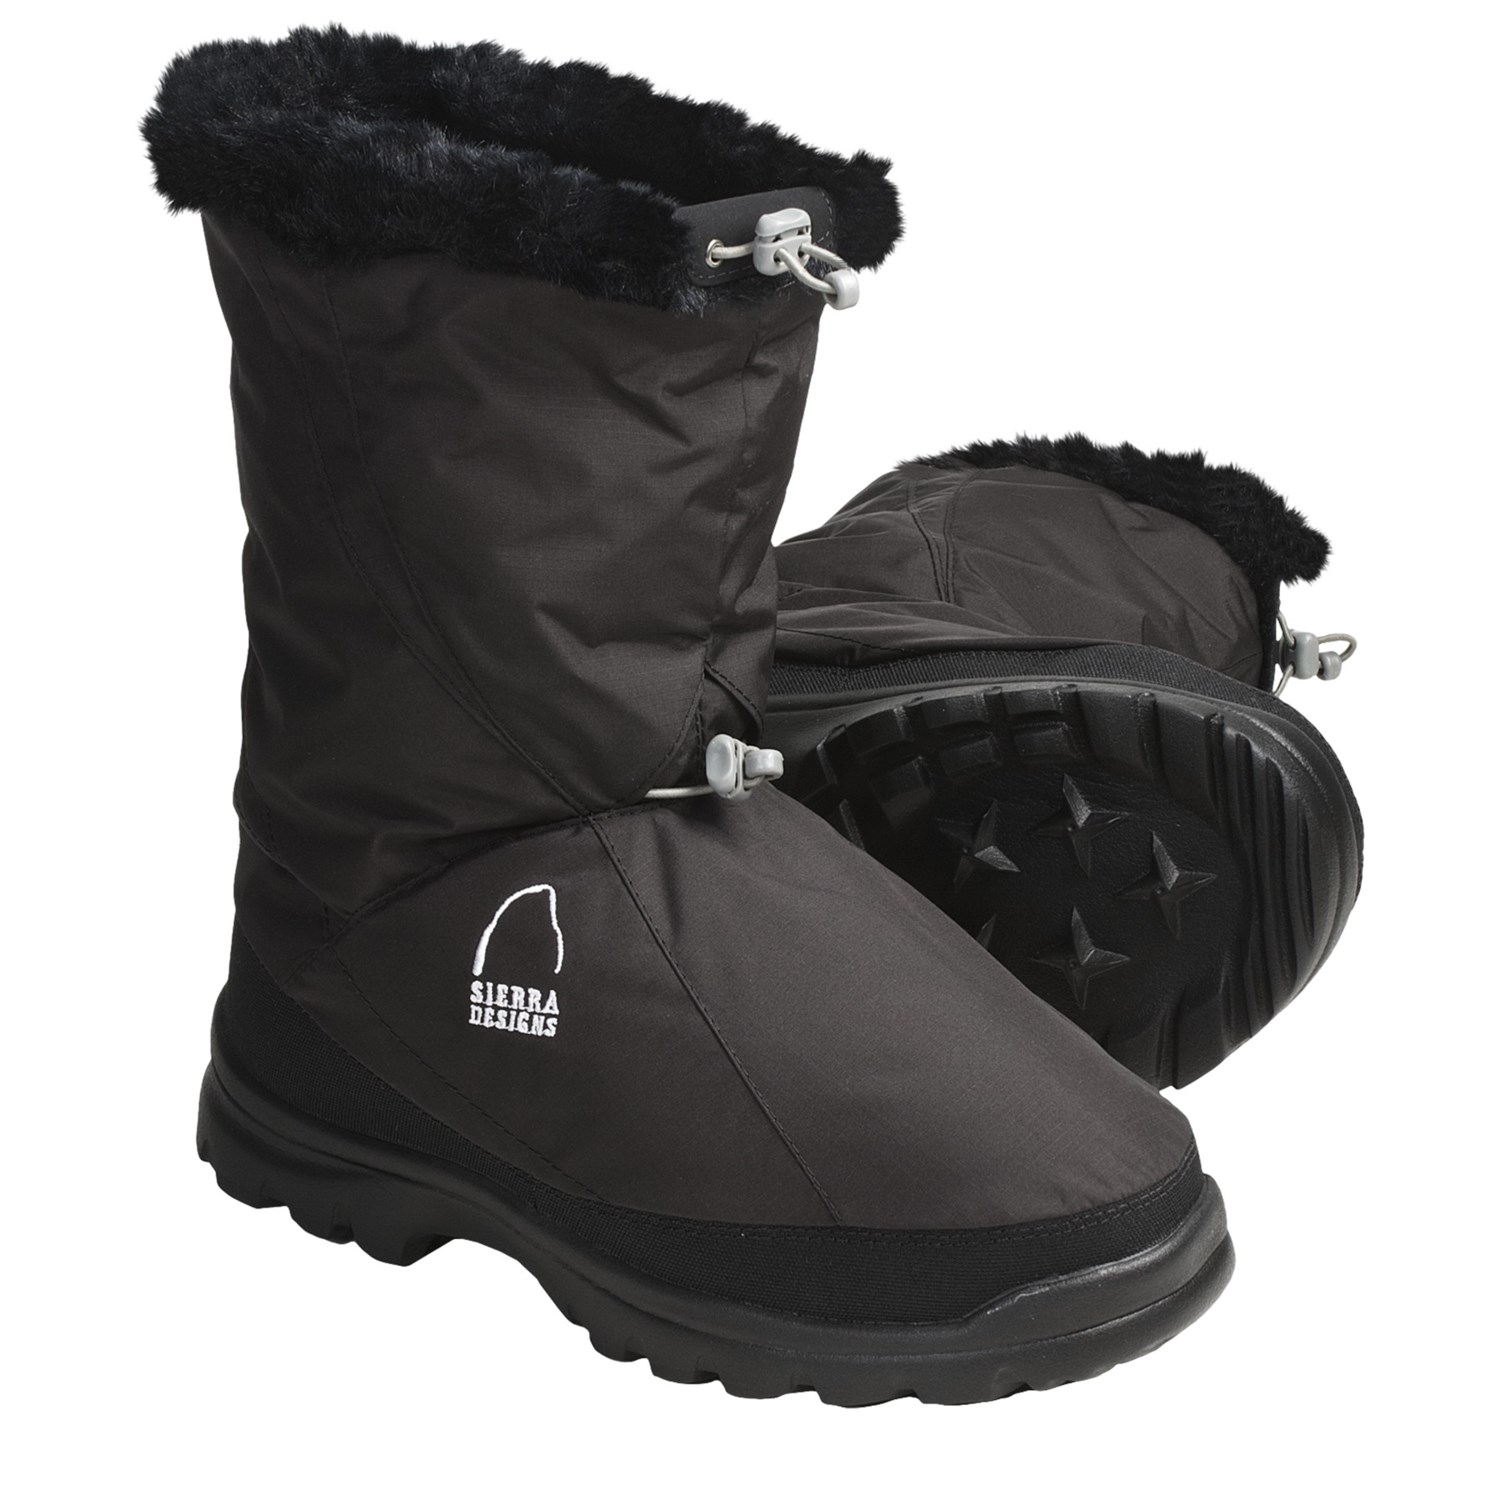 Sierra Designs Mountain Down Booties (For Women) 4146R - Save 38%